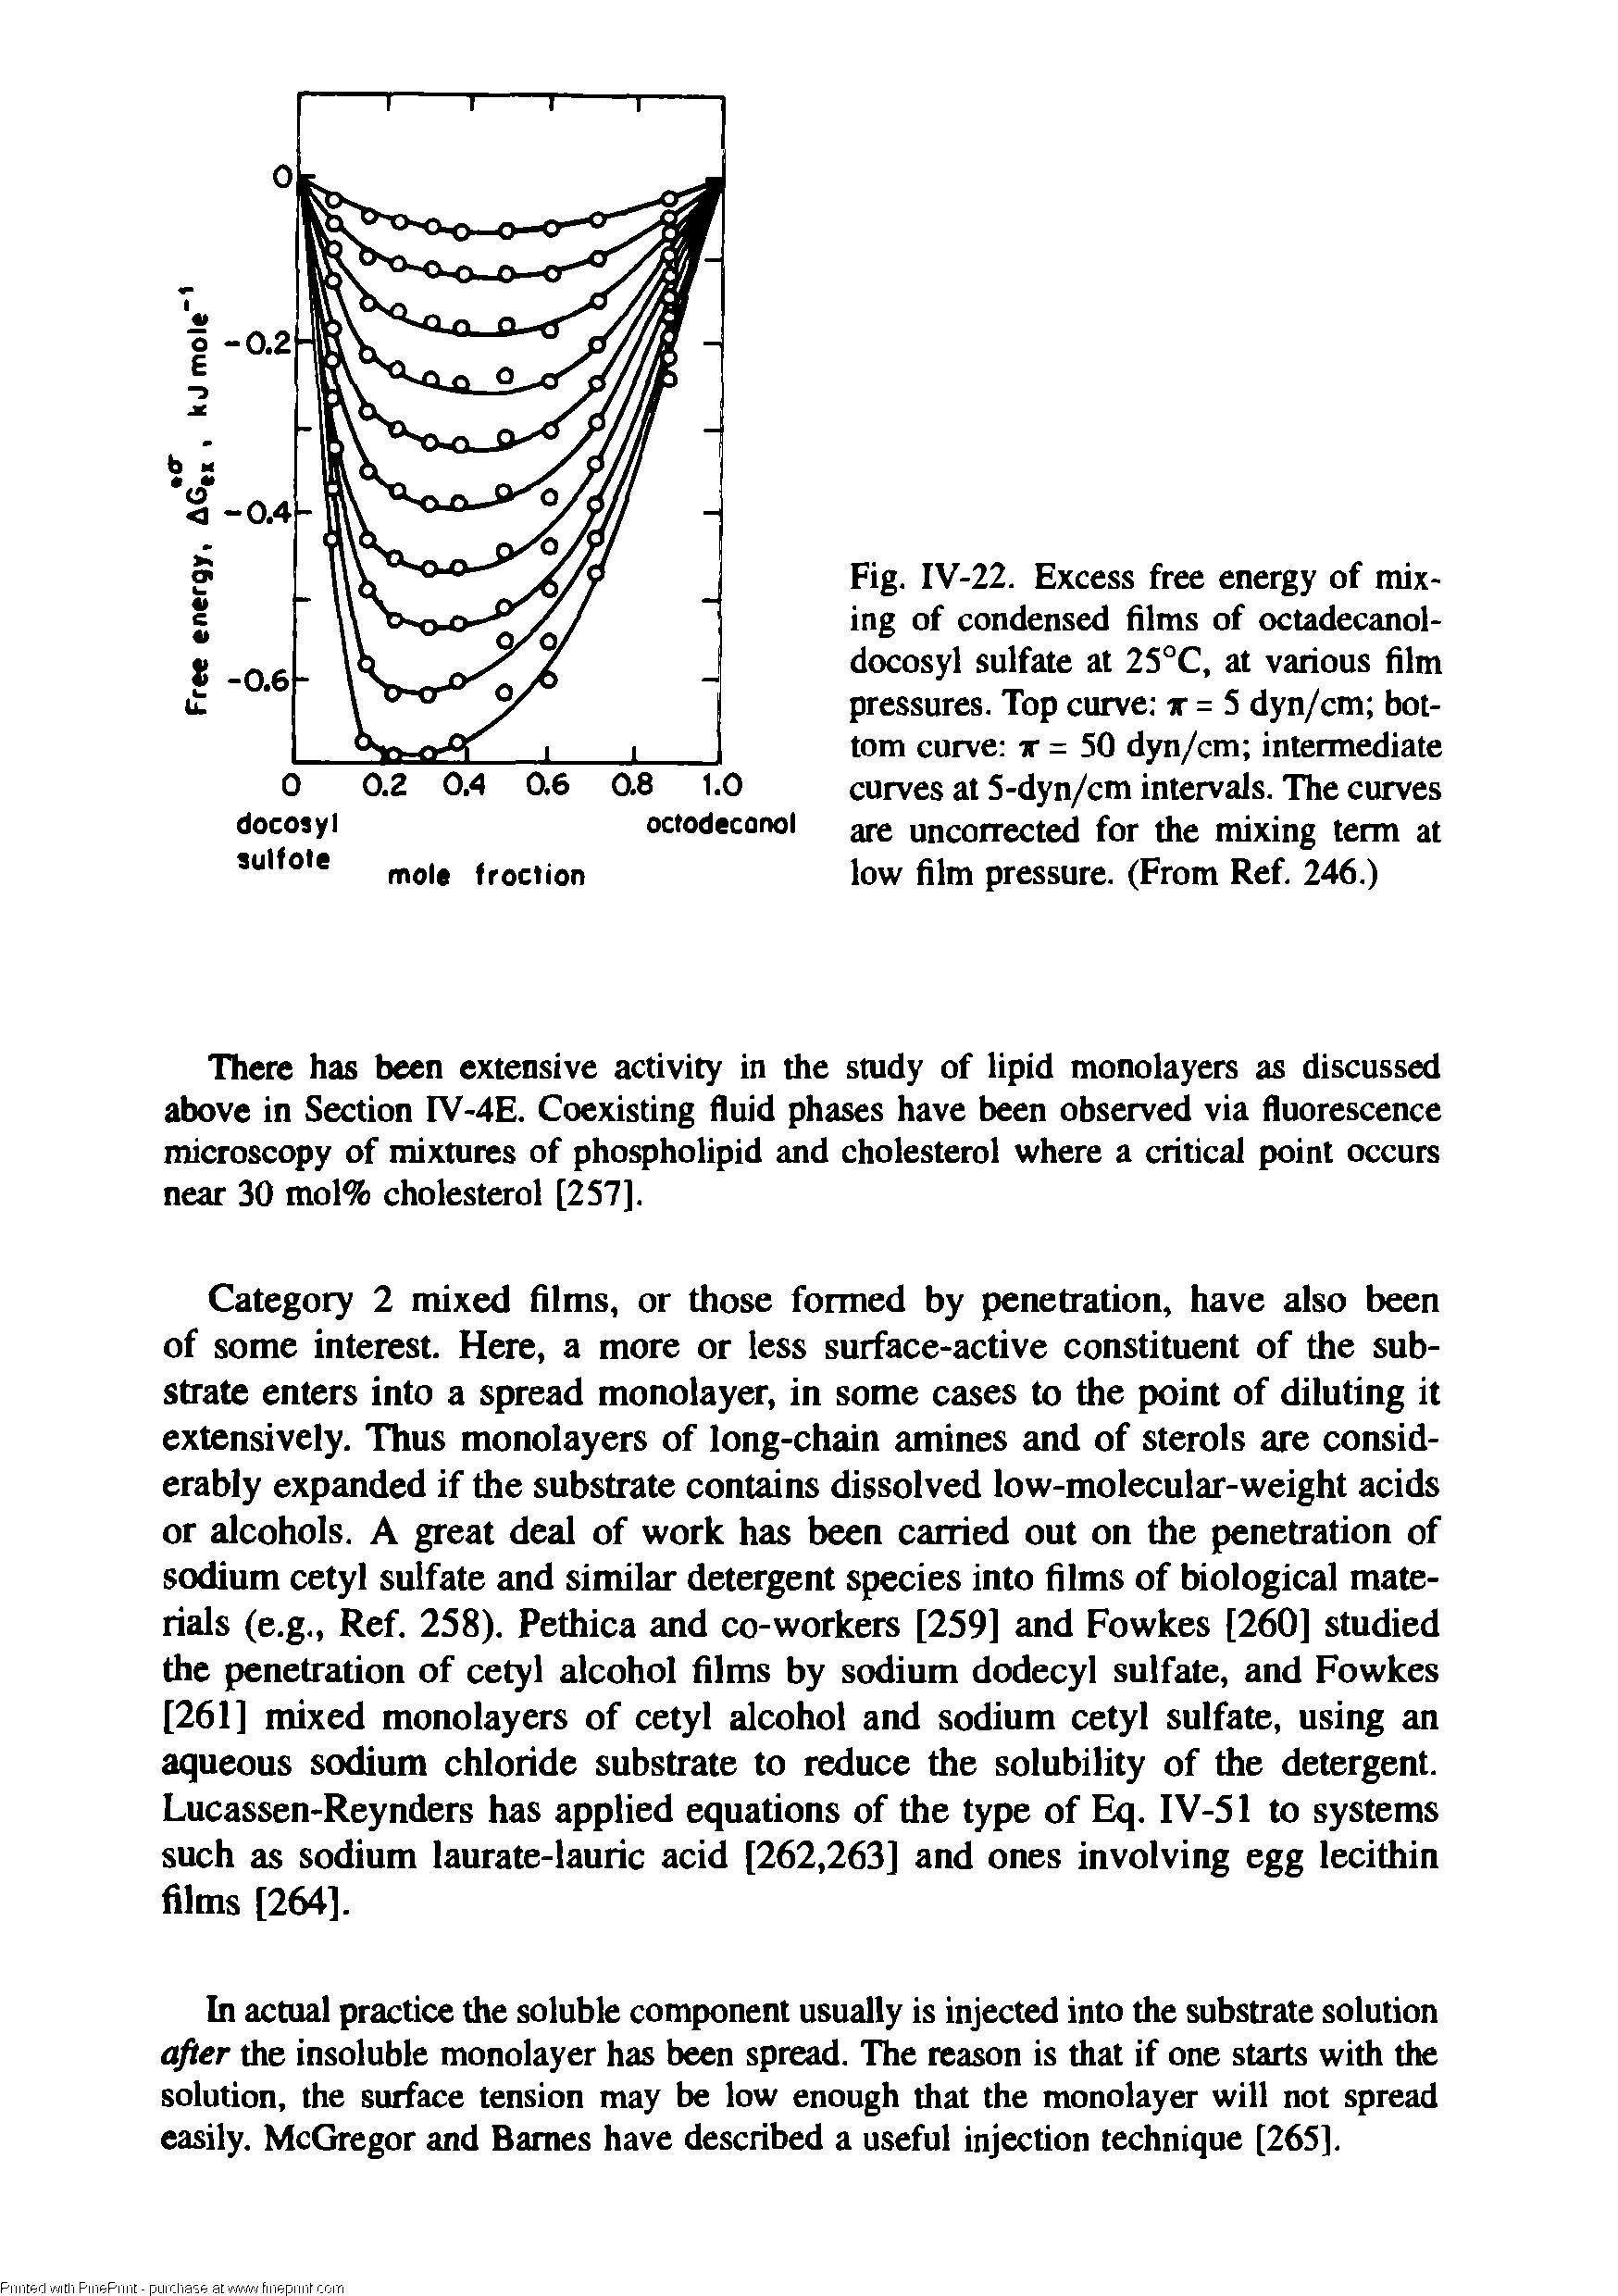 Fig. IV-22. Excess free energy of mixing of condensed films of octadecanol-docosyl sulfate at 25°C, at various film pressures. Top curve t = 5 dyn/cm bottom curve ir = 50 dyn/cm intermediate curves at 5-dyn/cm intervals. The curves are uncorrected for the mixing term at low film pressure. (From Ref. 246.)...